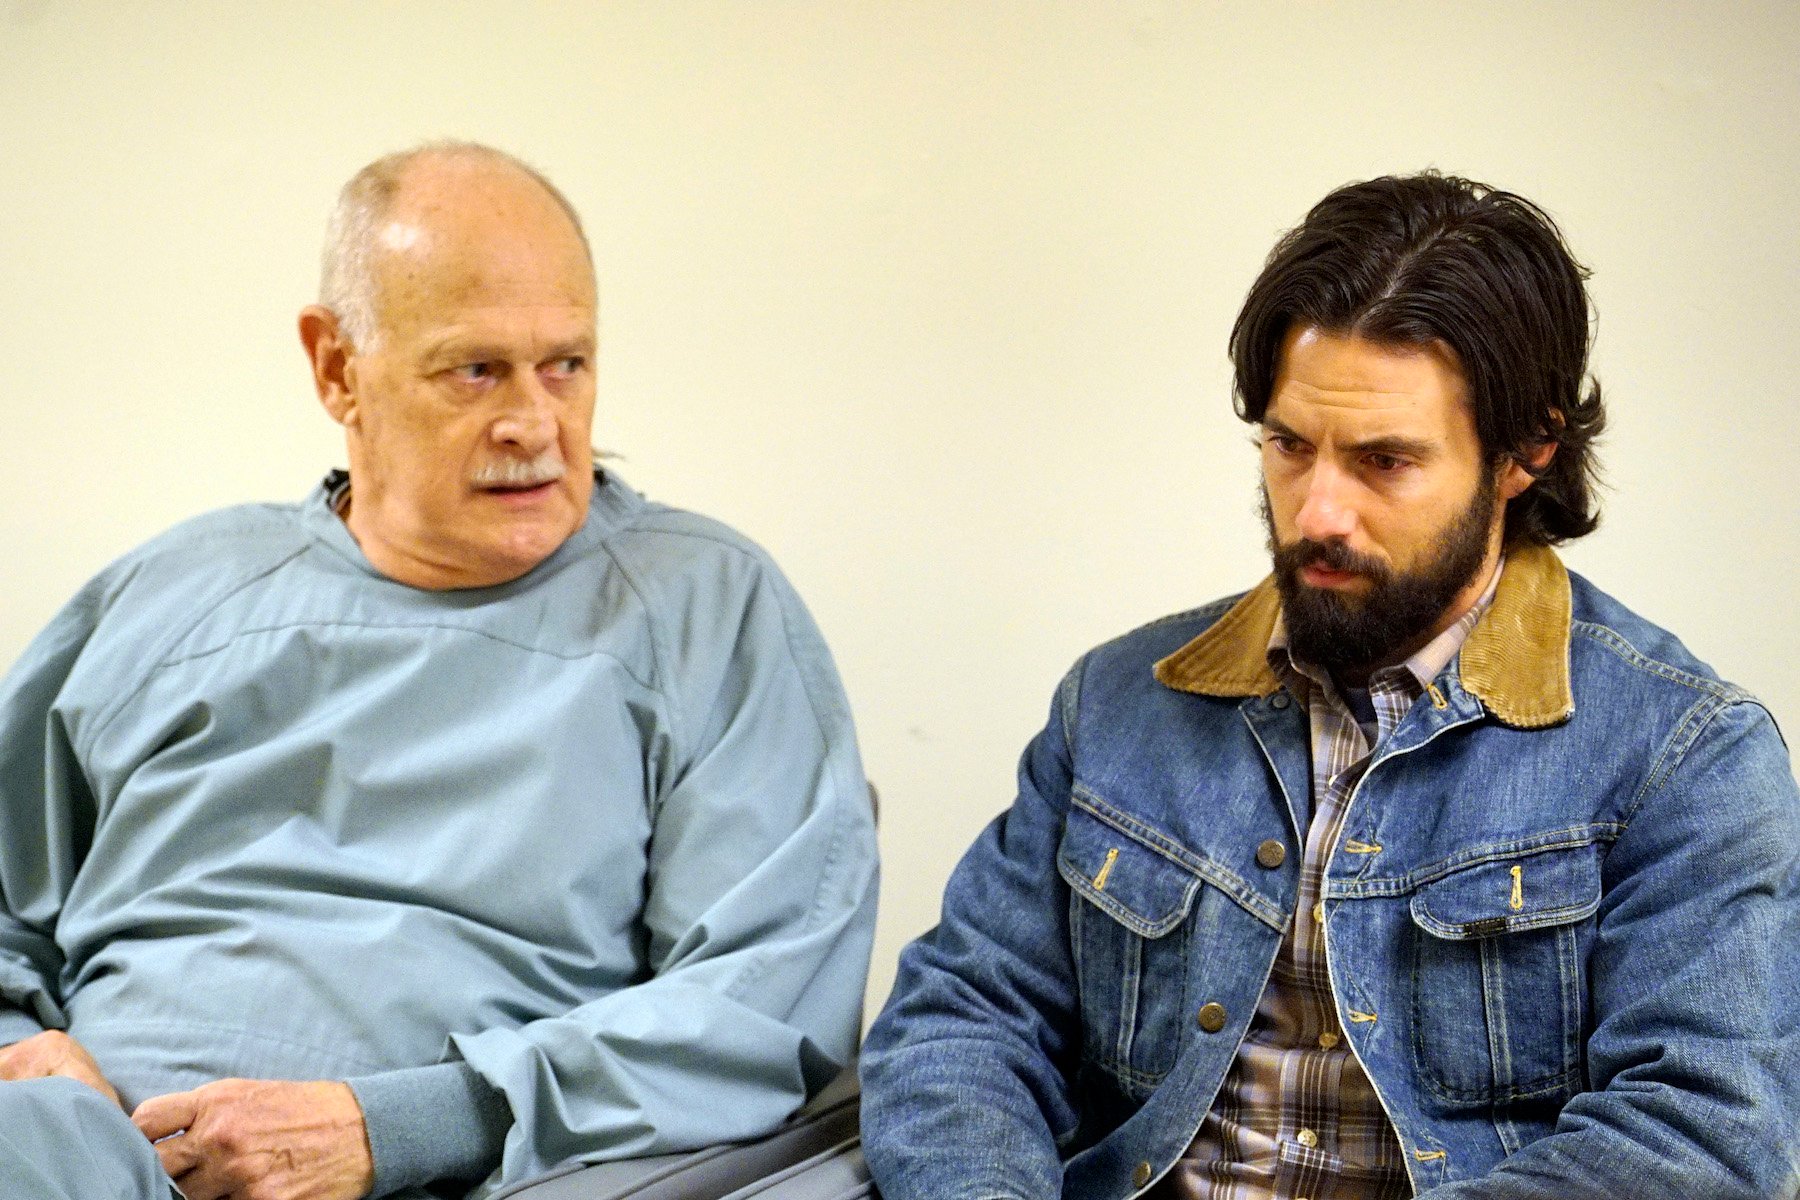 Gerald McRaney as Dr. K and Milo Ventimiglia as Jack Pearson in 'This Is Us' pilot